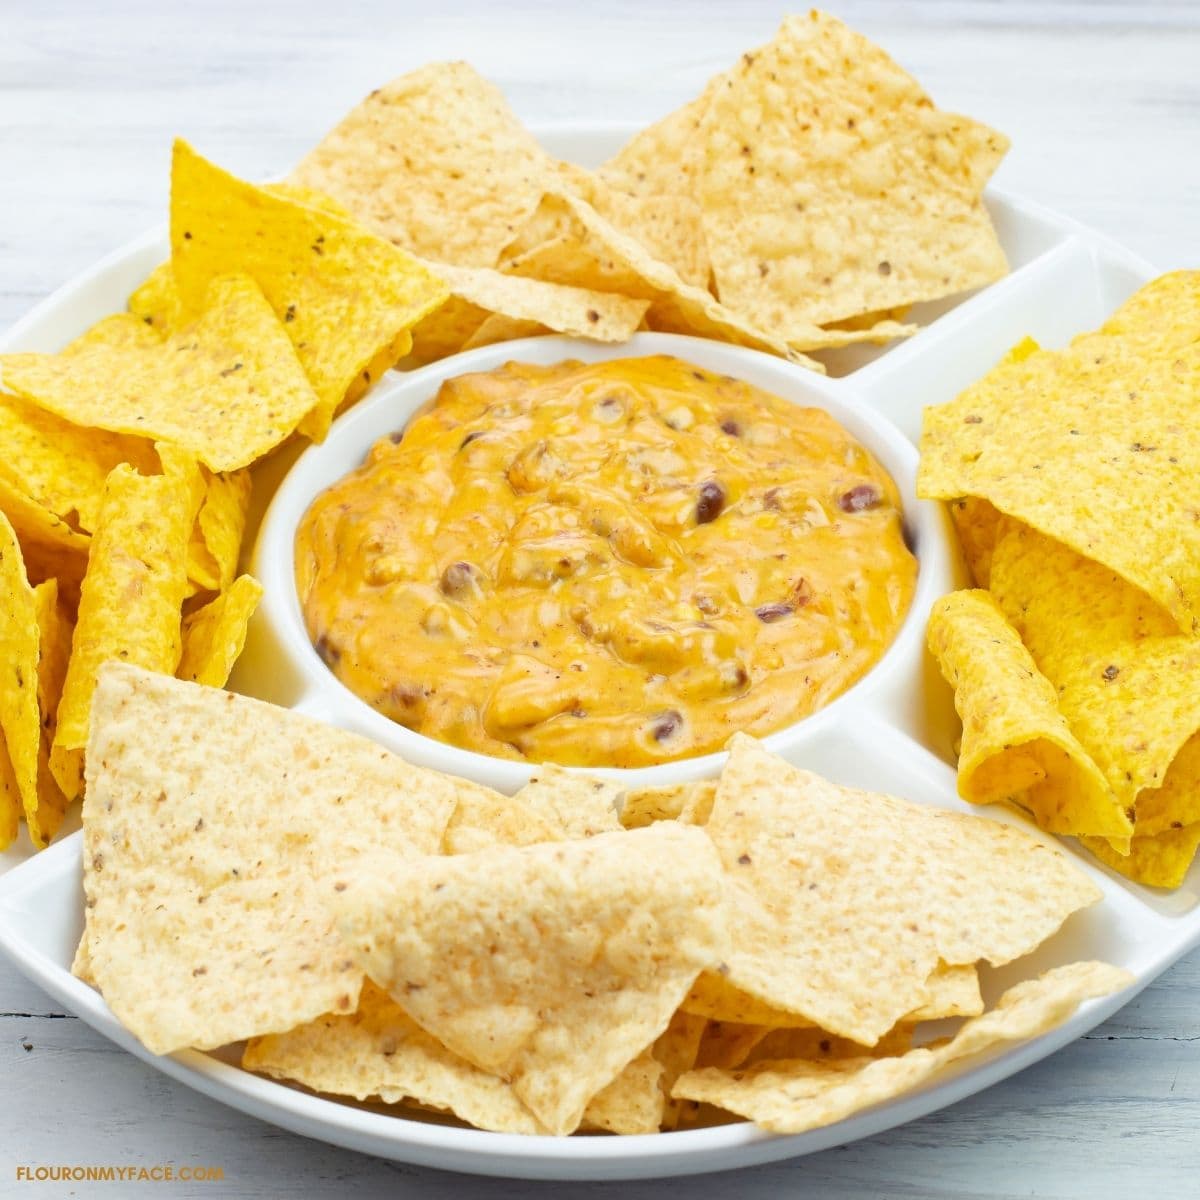 Chili Cheese Dip in a white serving dish with flour and corn chips.